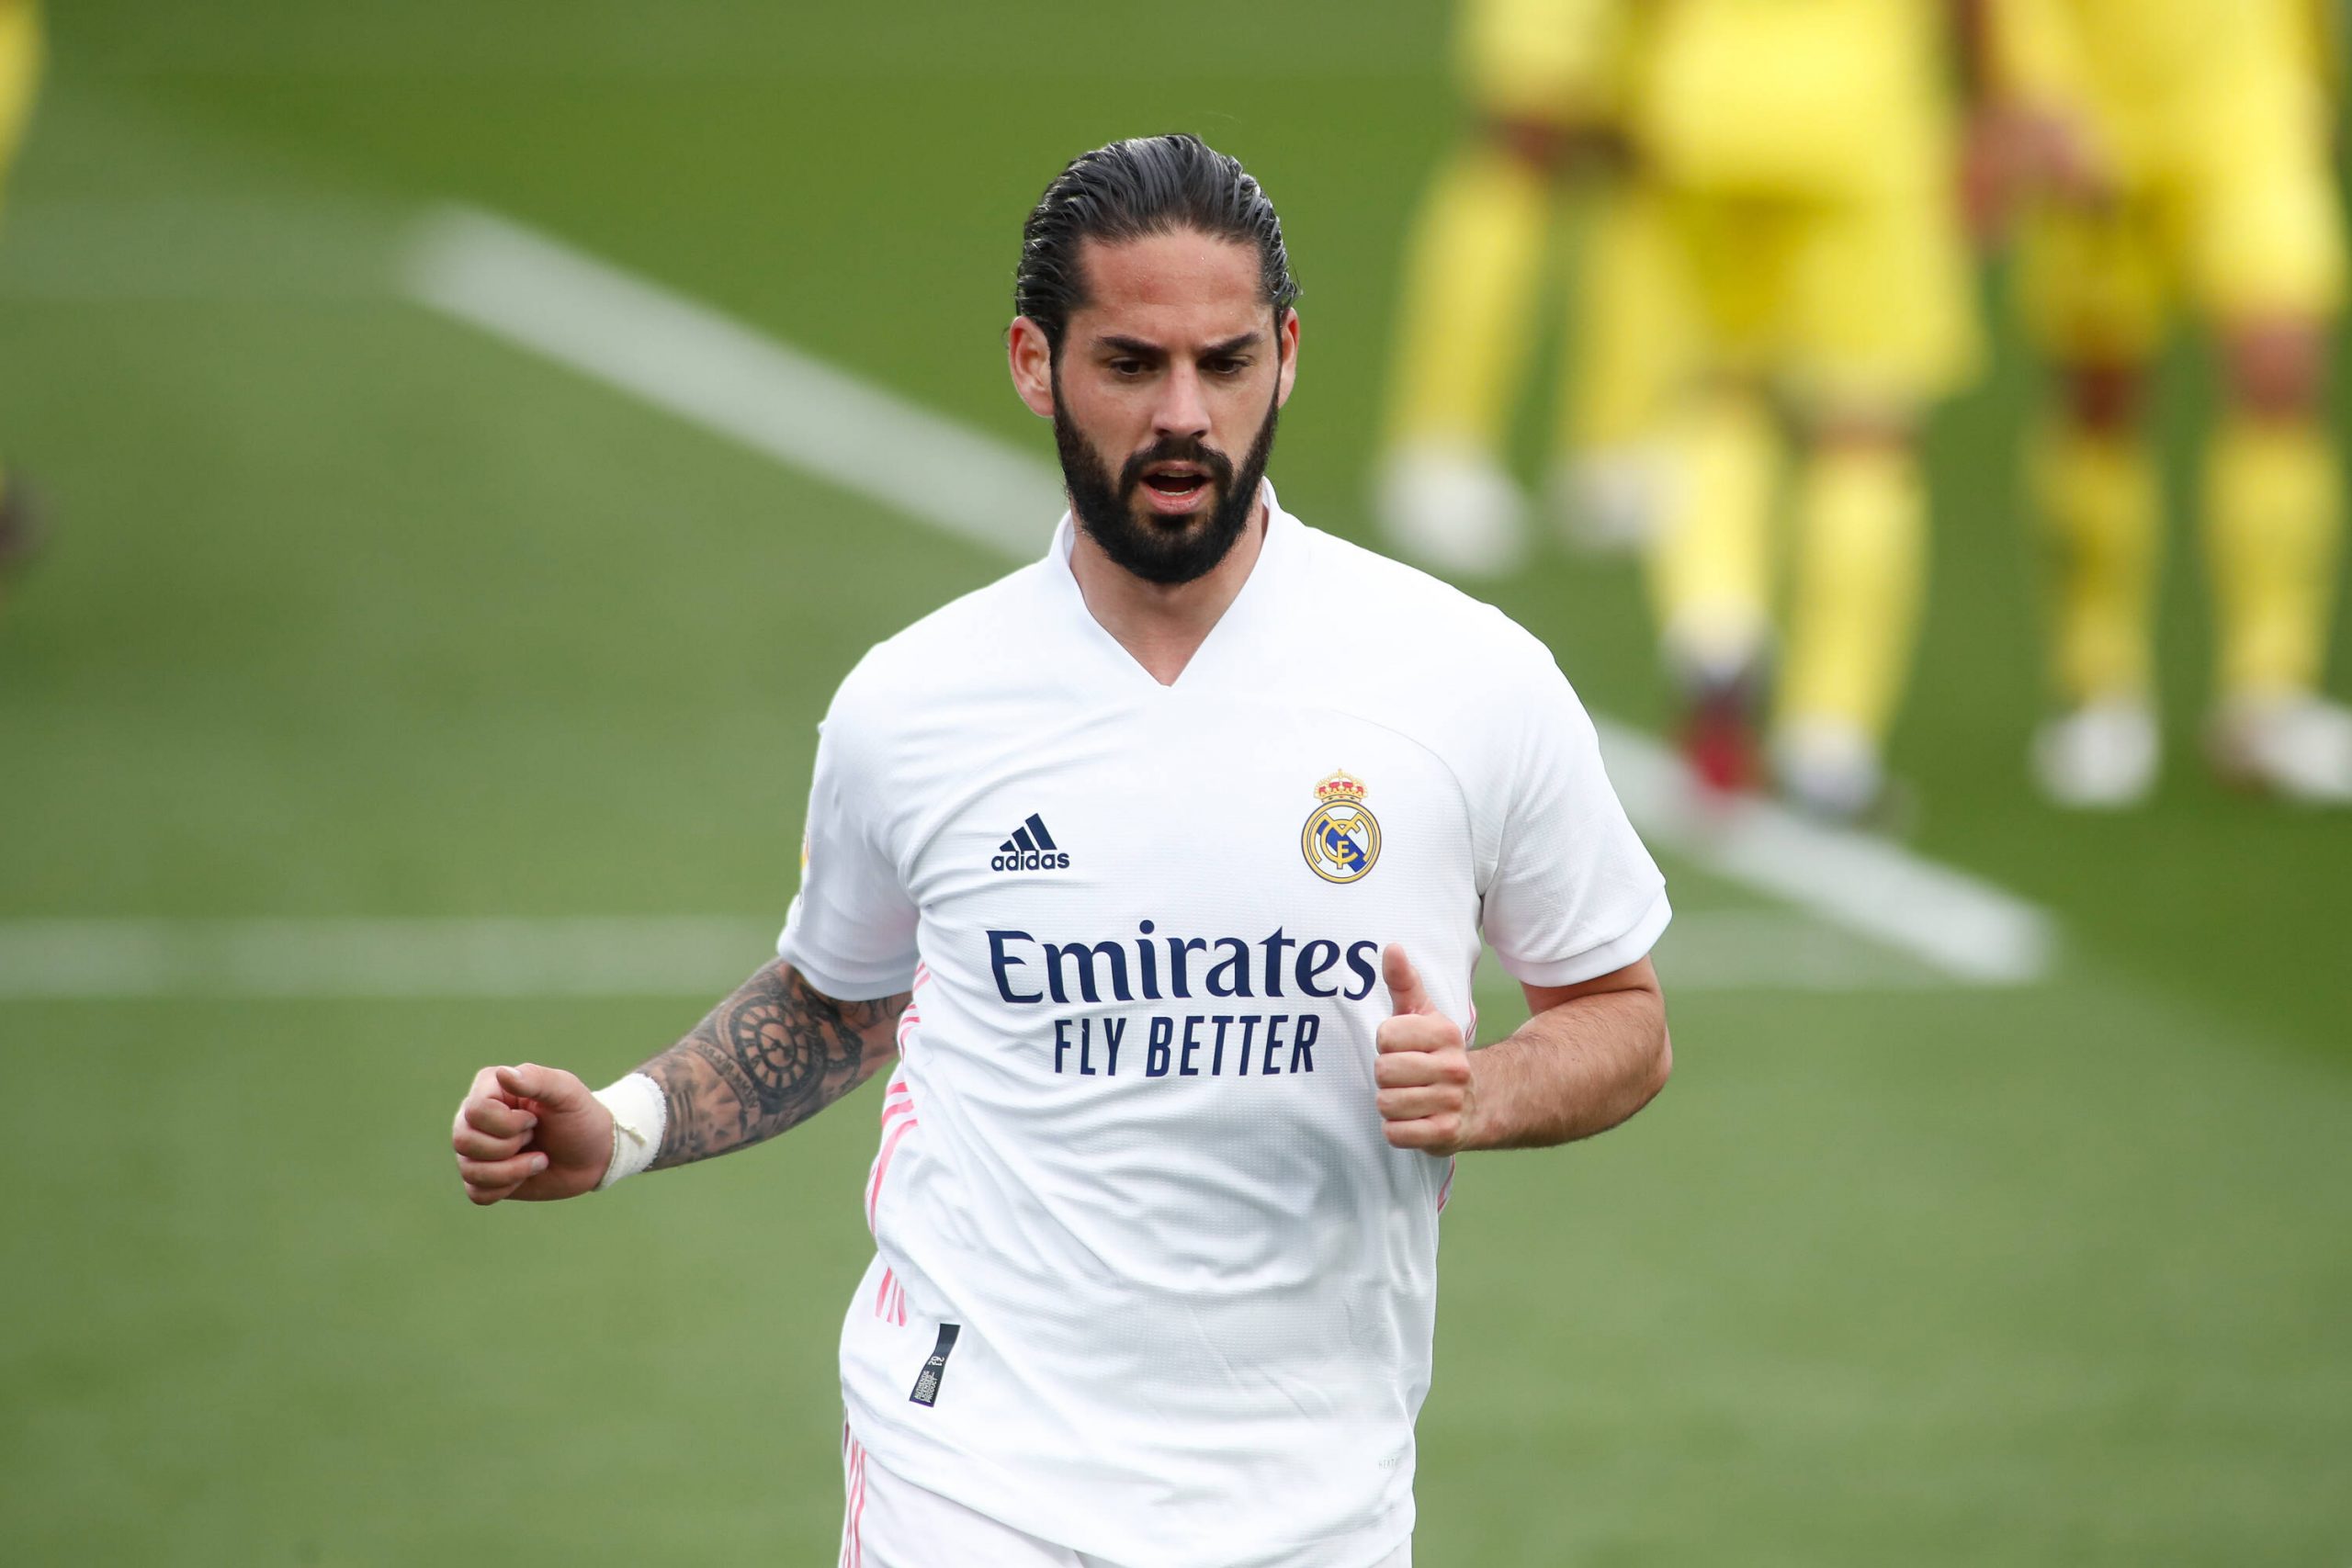 Real Madrid star, Isco, in action.